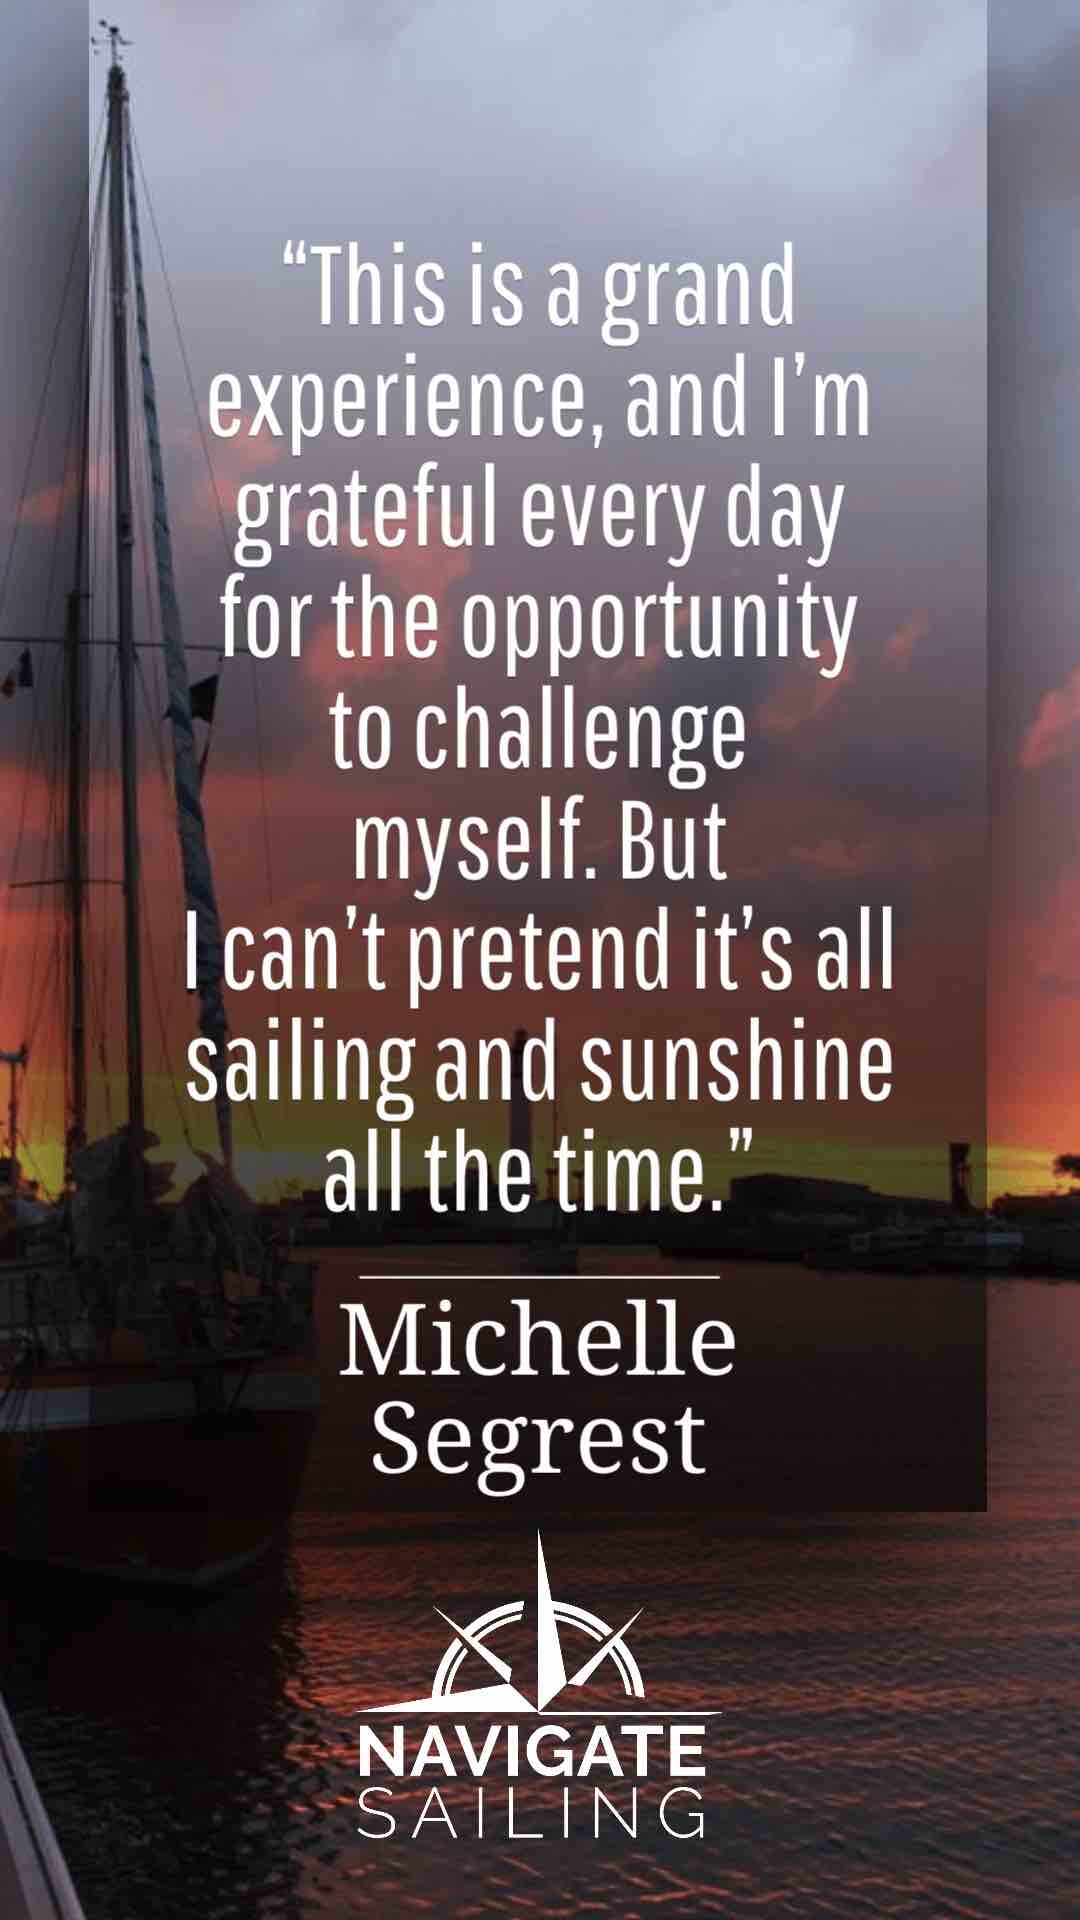 Sailing is challenging quote